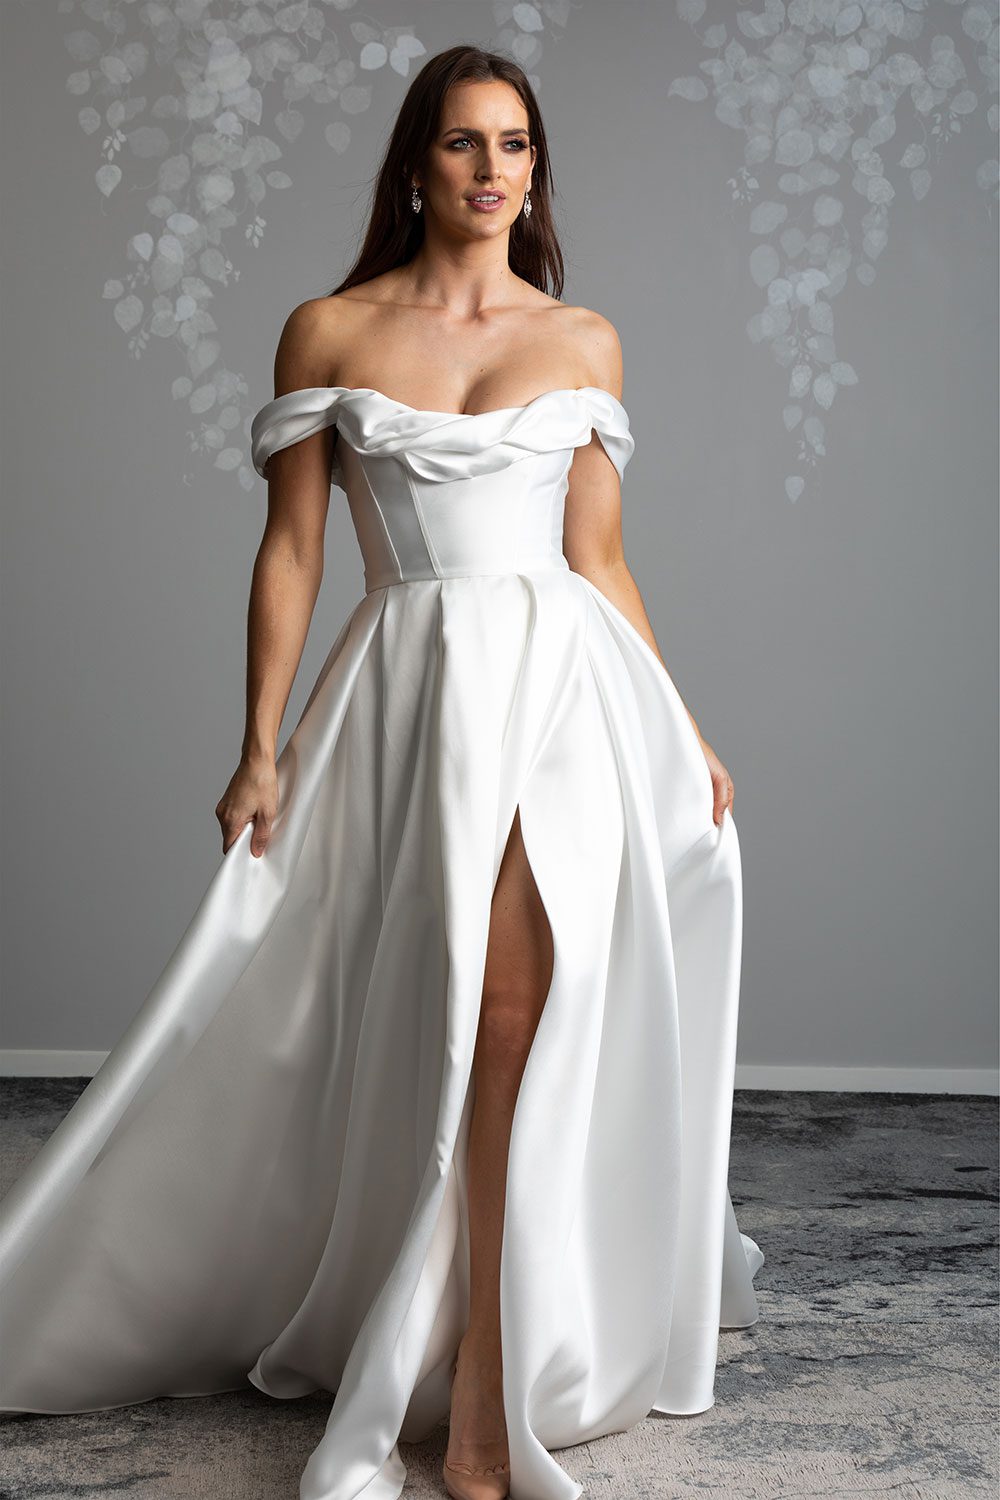 Helena Wedding Dress by Vinka Design - The statement scoop neckline and daring cross-over concealed leg split featured on our Helena gown is complimented with a nostalgic ball gown silhouette. The classic corseted bodice is adorned with a draped off-shoulder detail, framing the neckline whilst adding definition and drawing the eye to the wearer’s waist which spills into luxe layers of Japanese Mikado satin. Model walking forward showing off front split